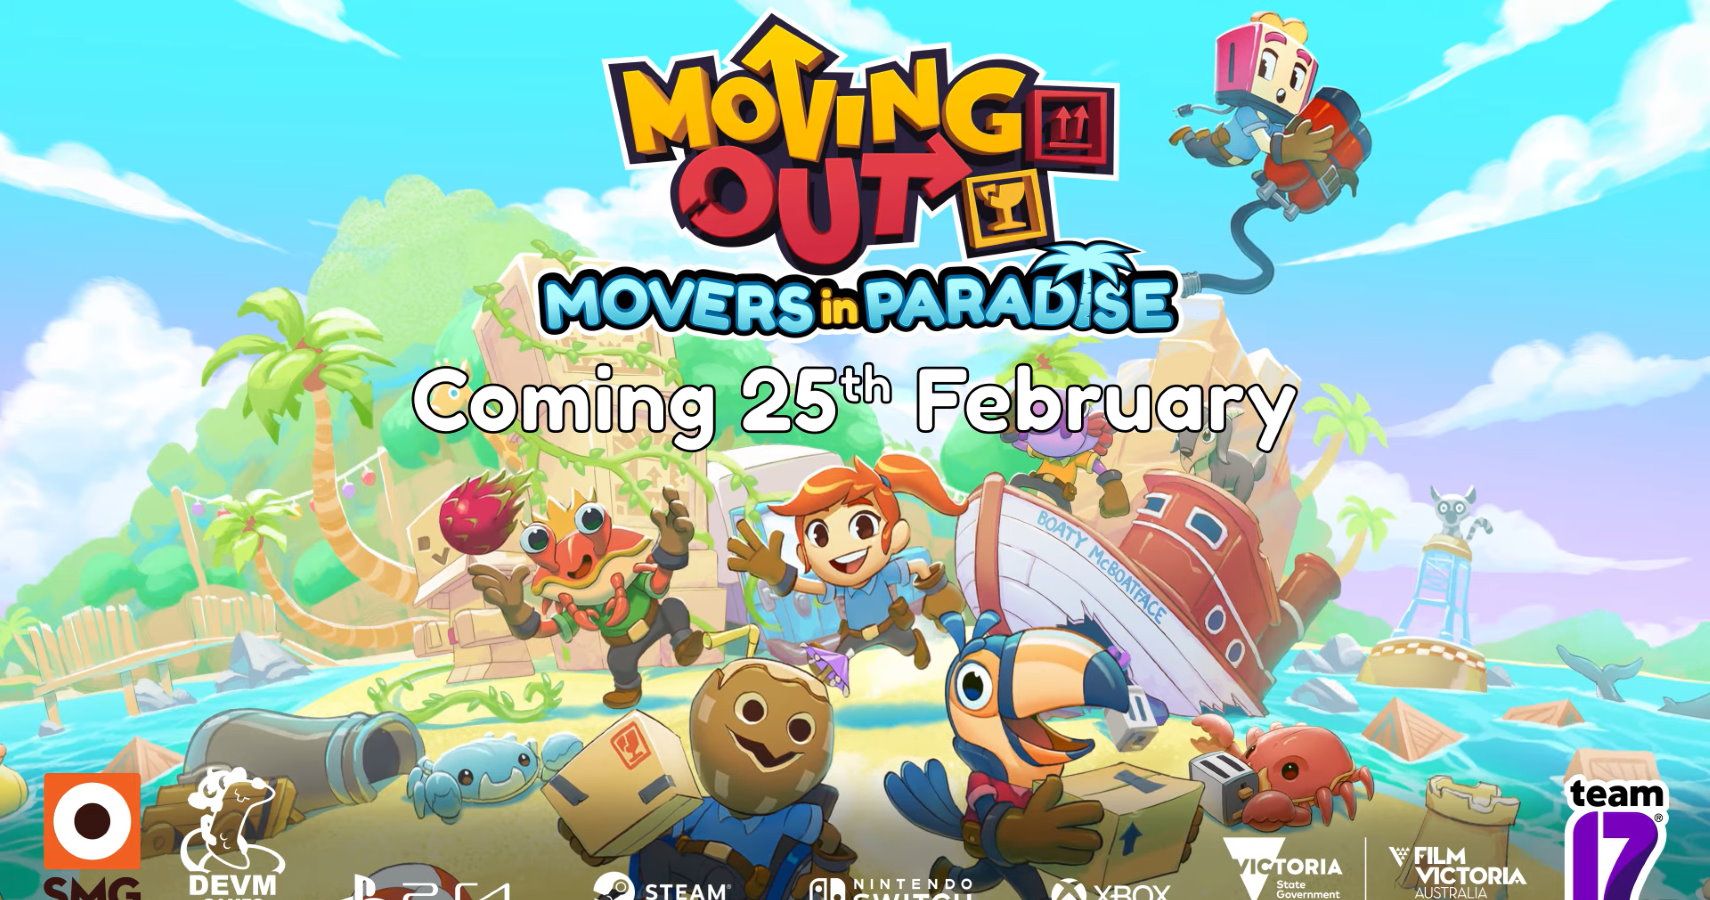 Movers in Paradise